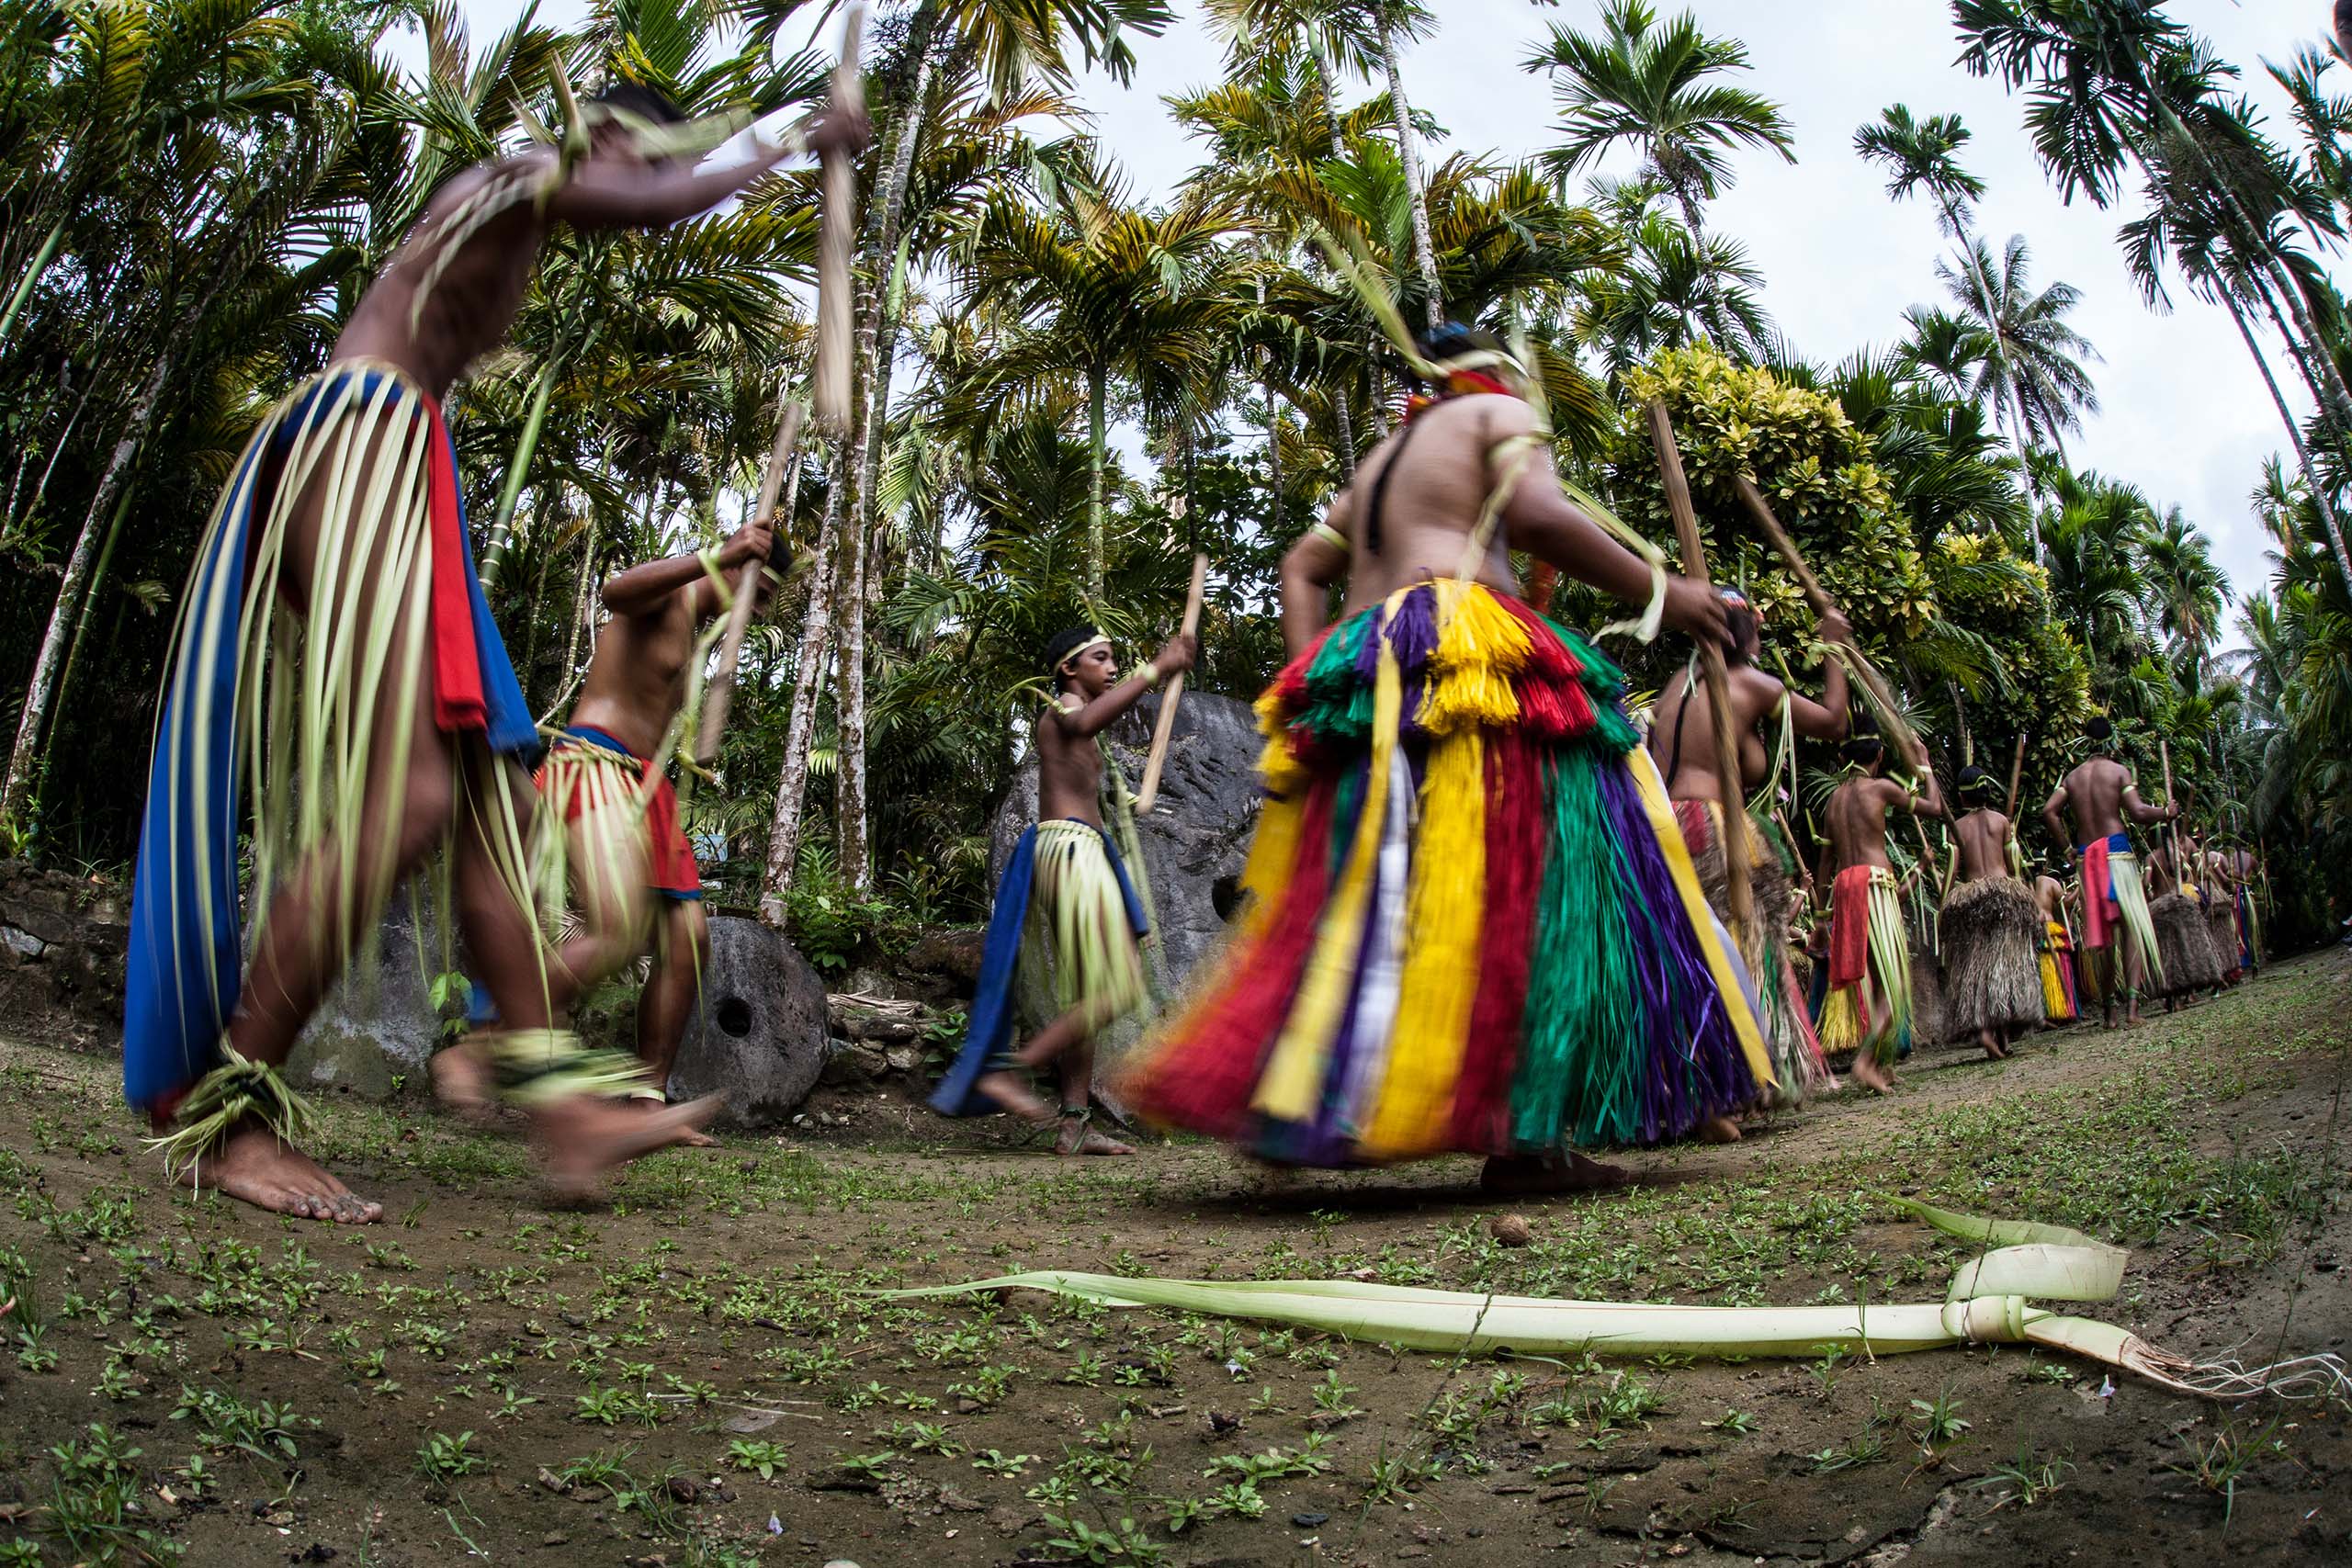 Young dancers from a local village on the Micronesian island of Yap perform traditional dances that have been passed down for generations. This idyllic island has held onto its culture over time.